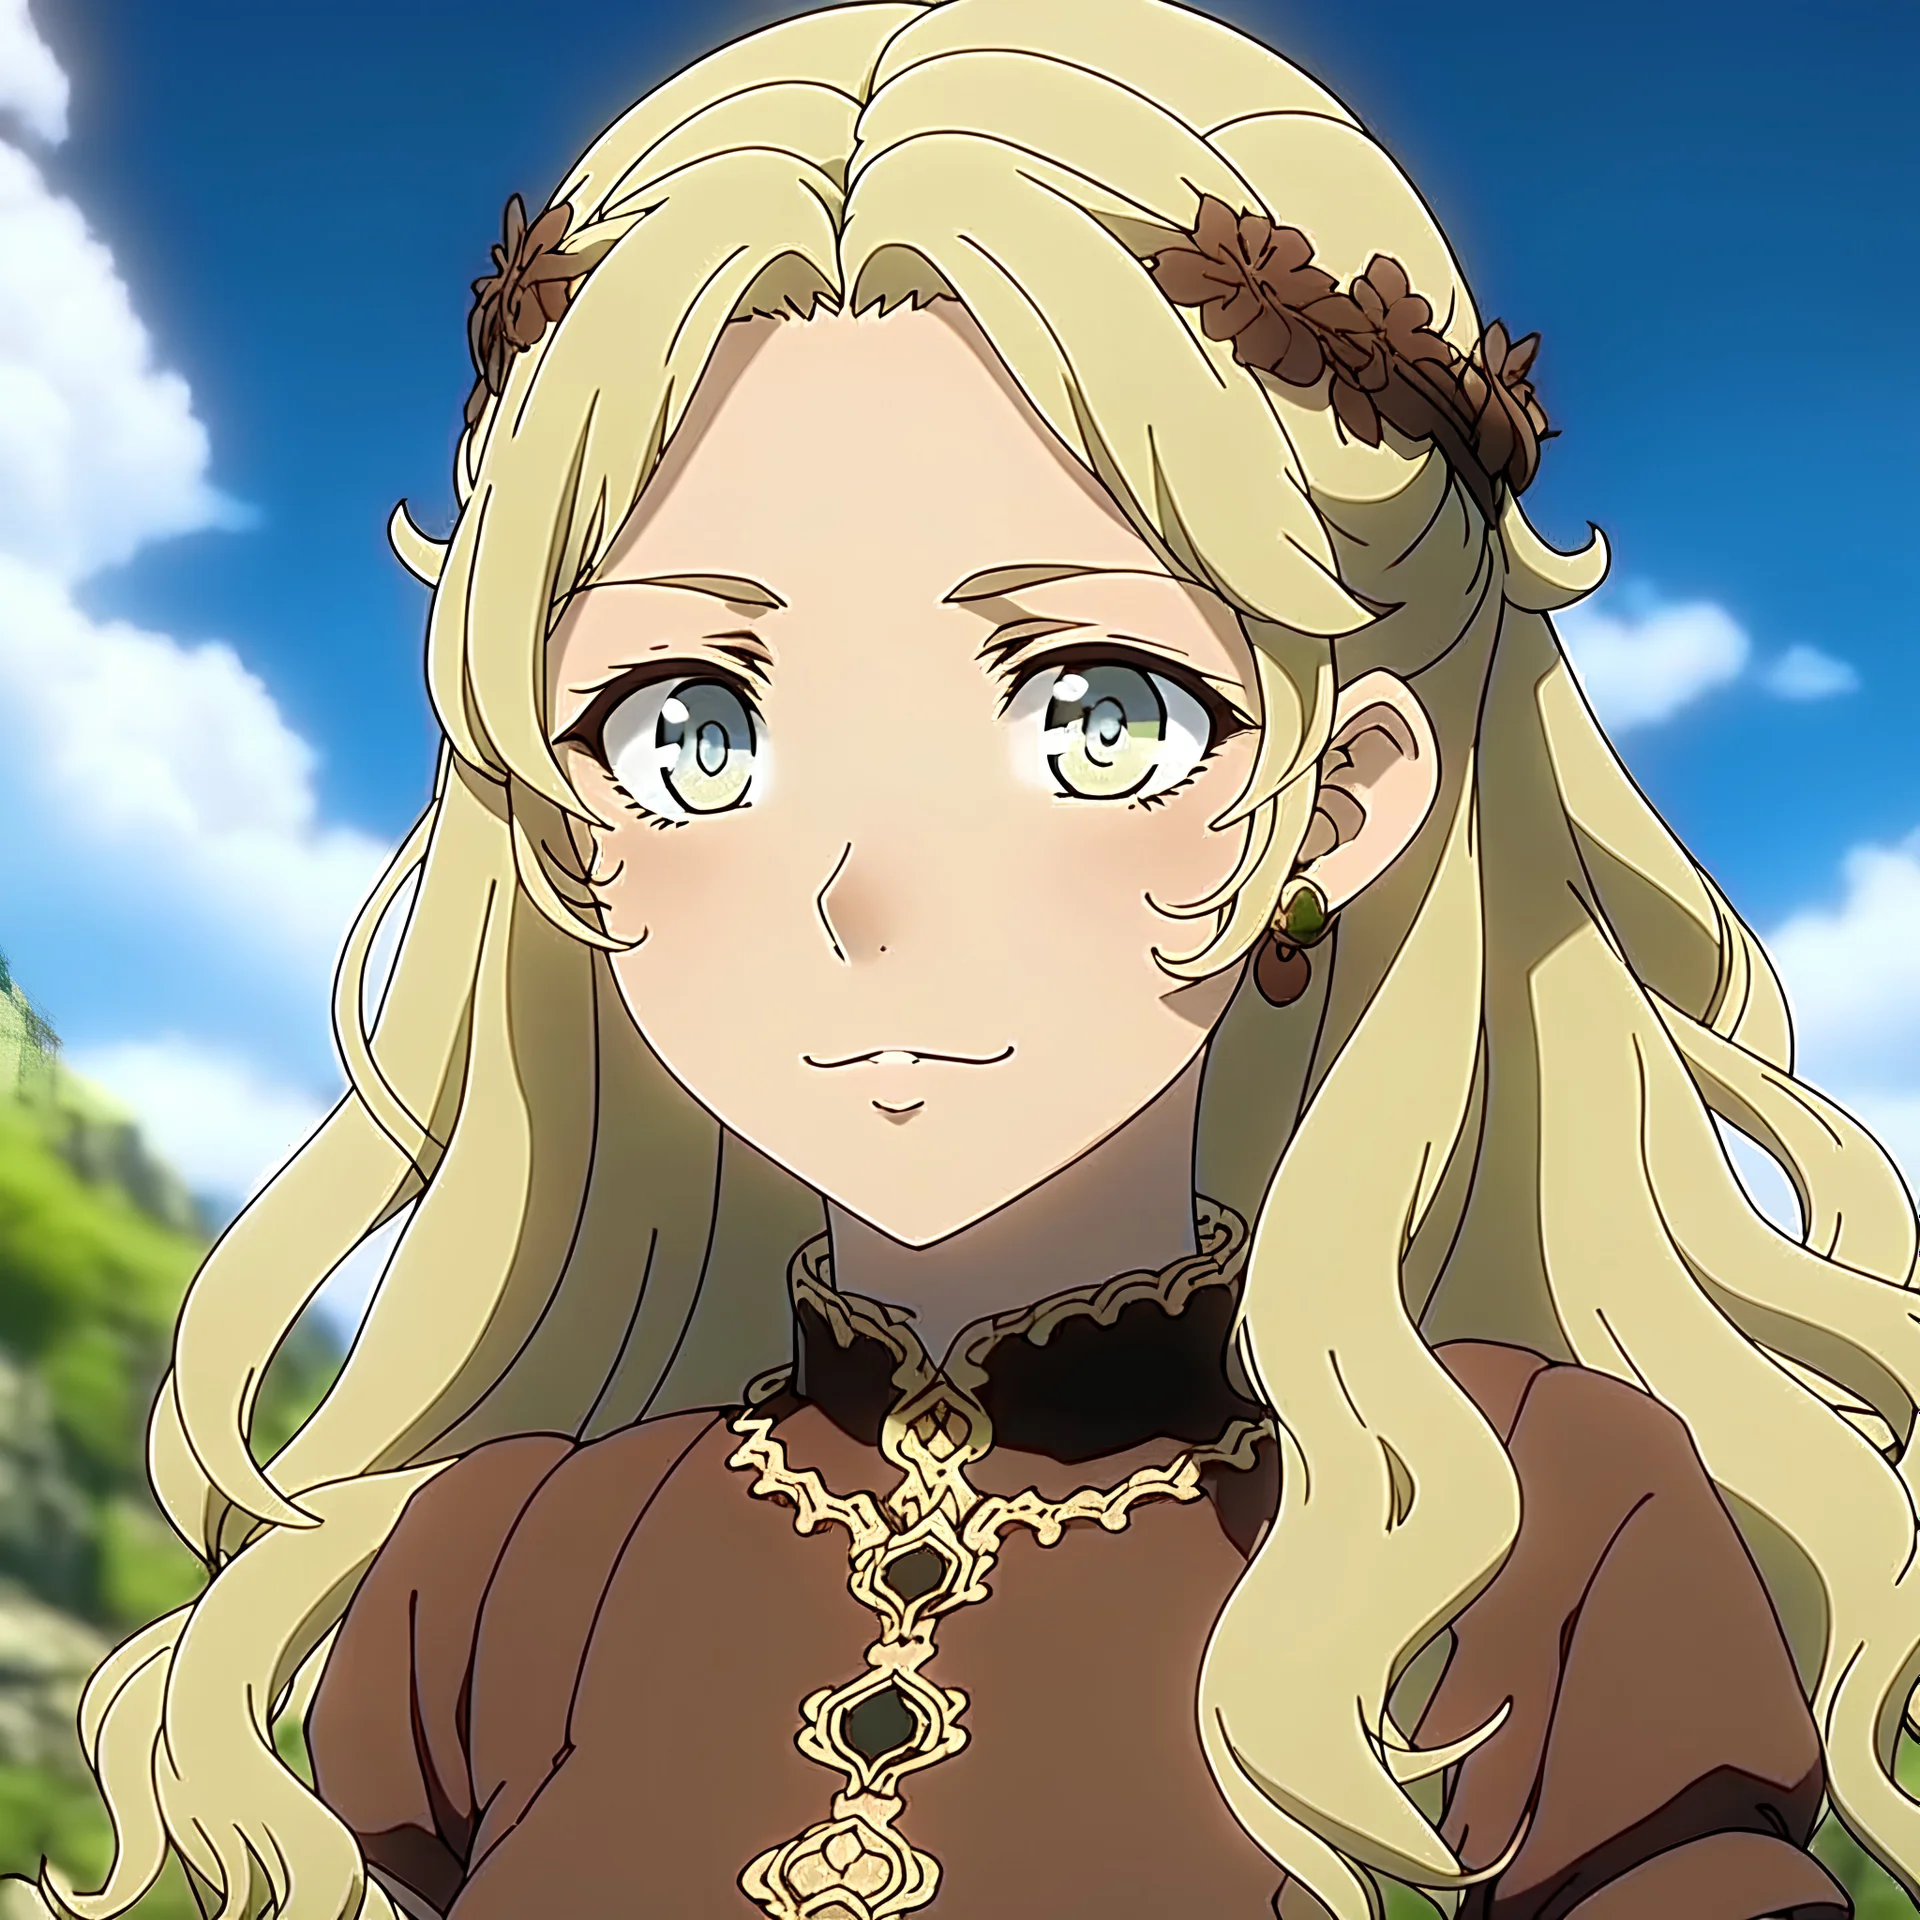 create me a picture of noelle from black clover anime